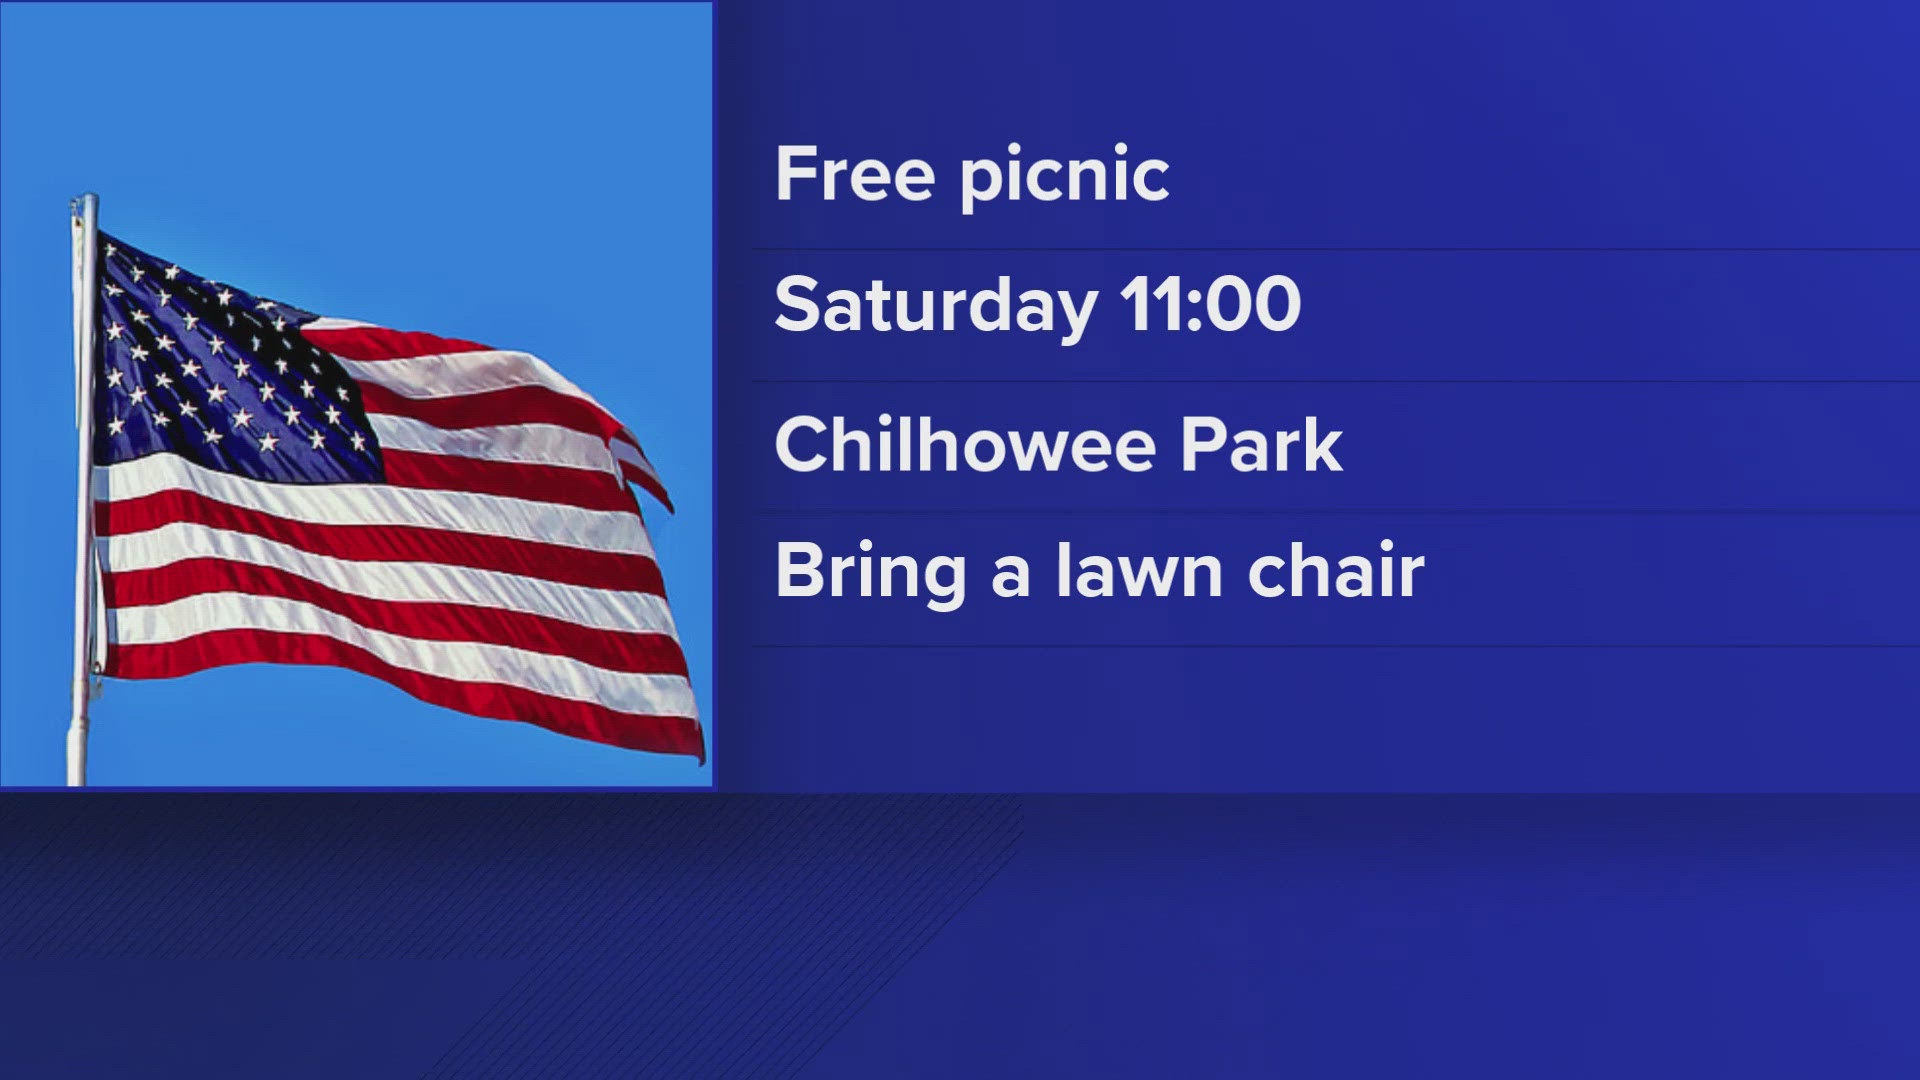 The picnic will be at Chilhowee Park and participants can bring guests.